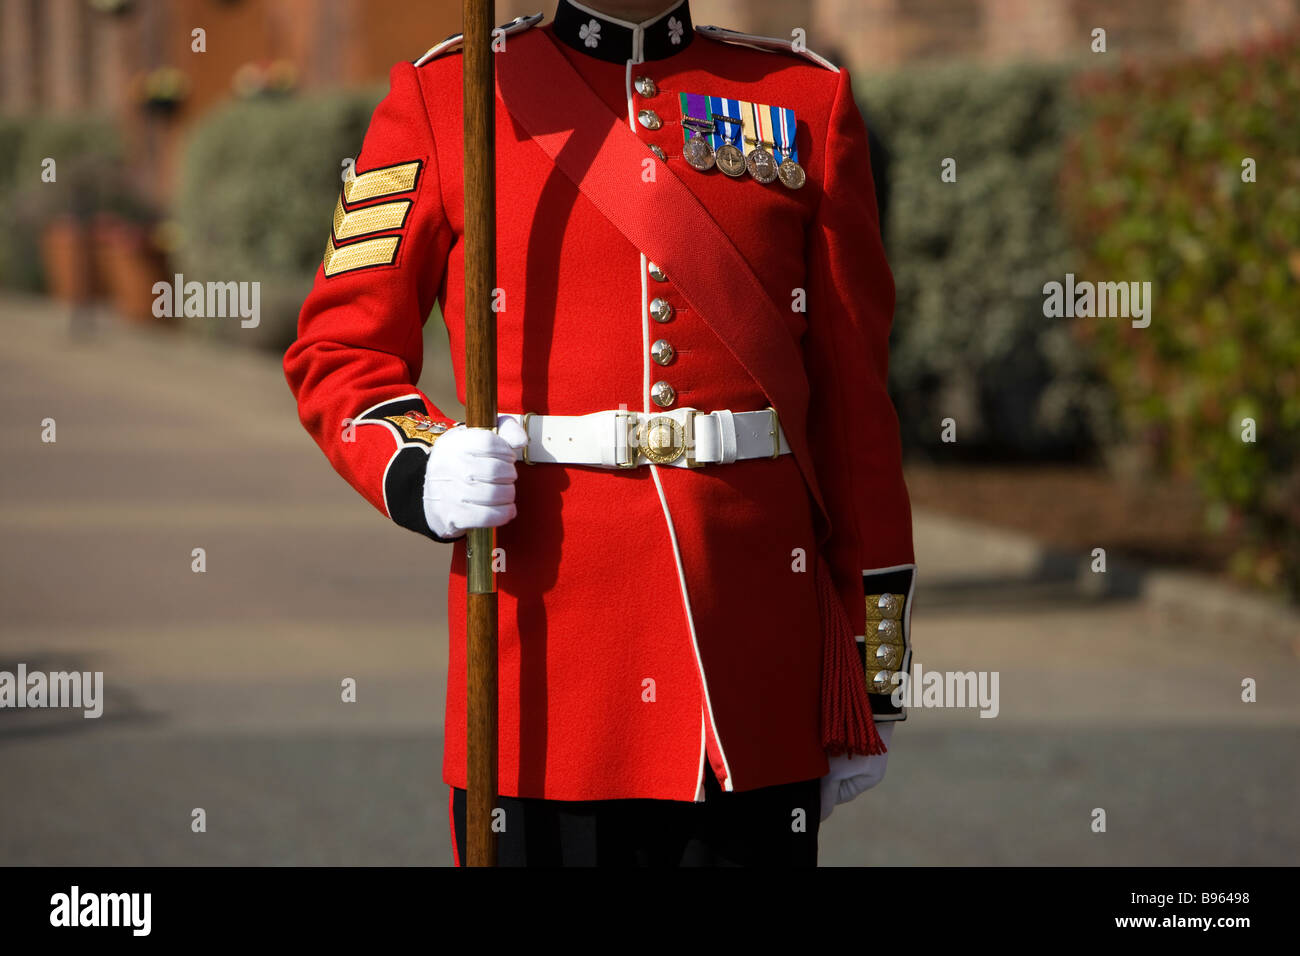 The 1st Battalion the Irish Guards on parade at Victoria Barracks Windsor UK on St Patrick's Day Stock Photo